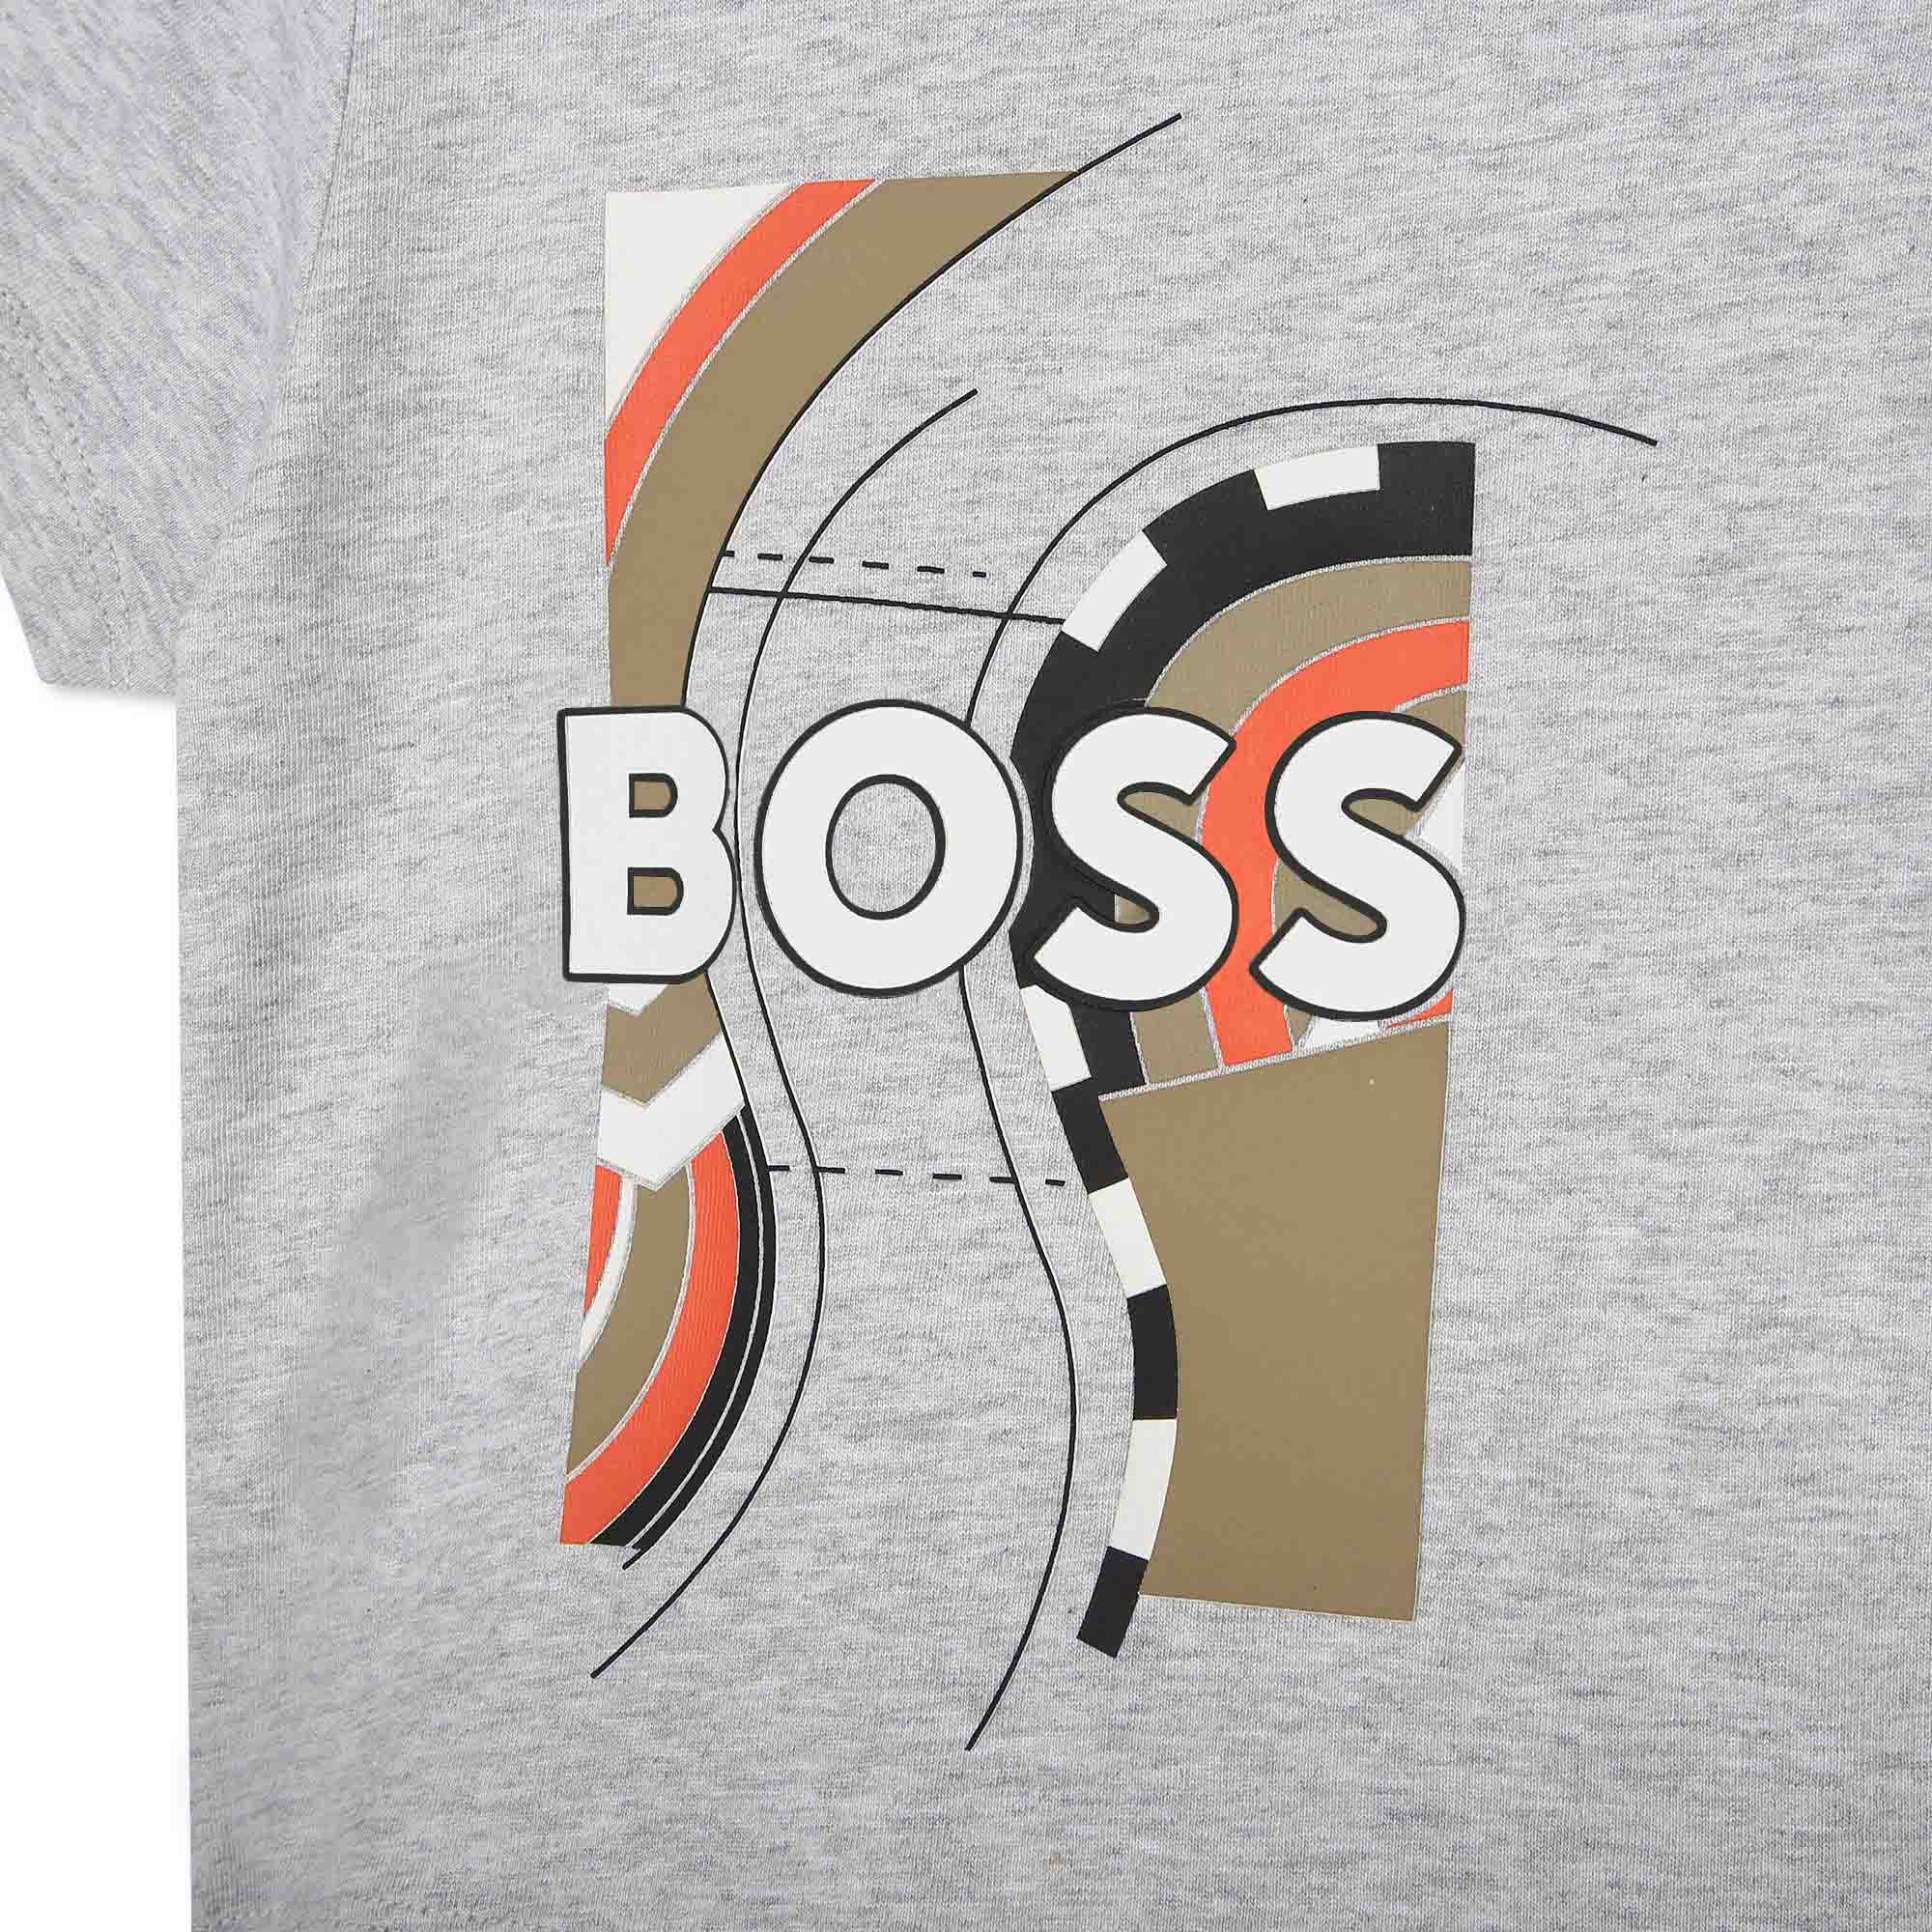 Cotton t-shirt with print BOSS for BOY